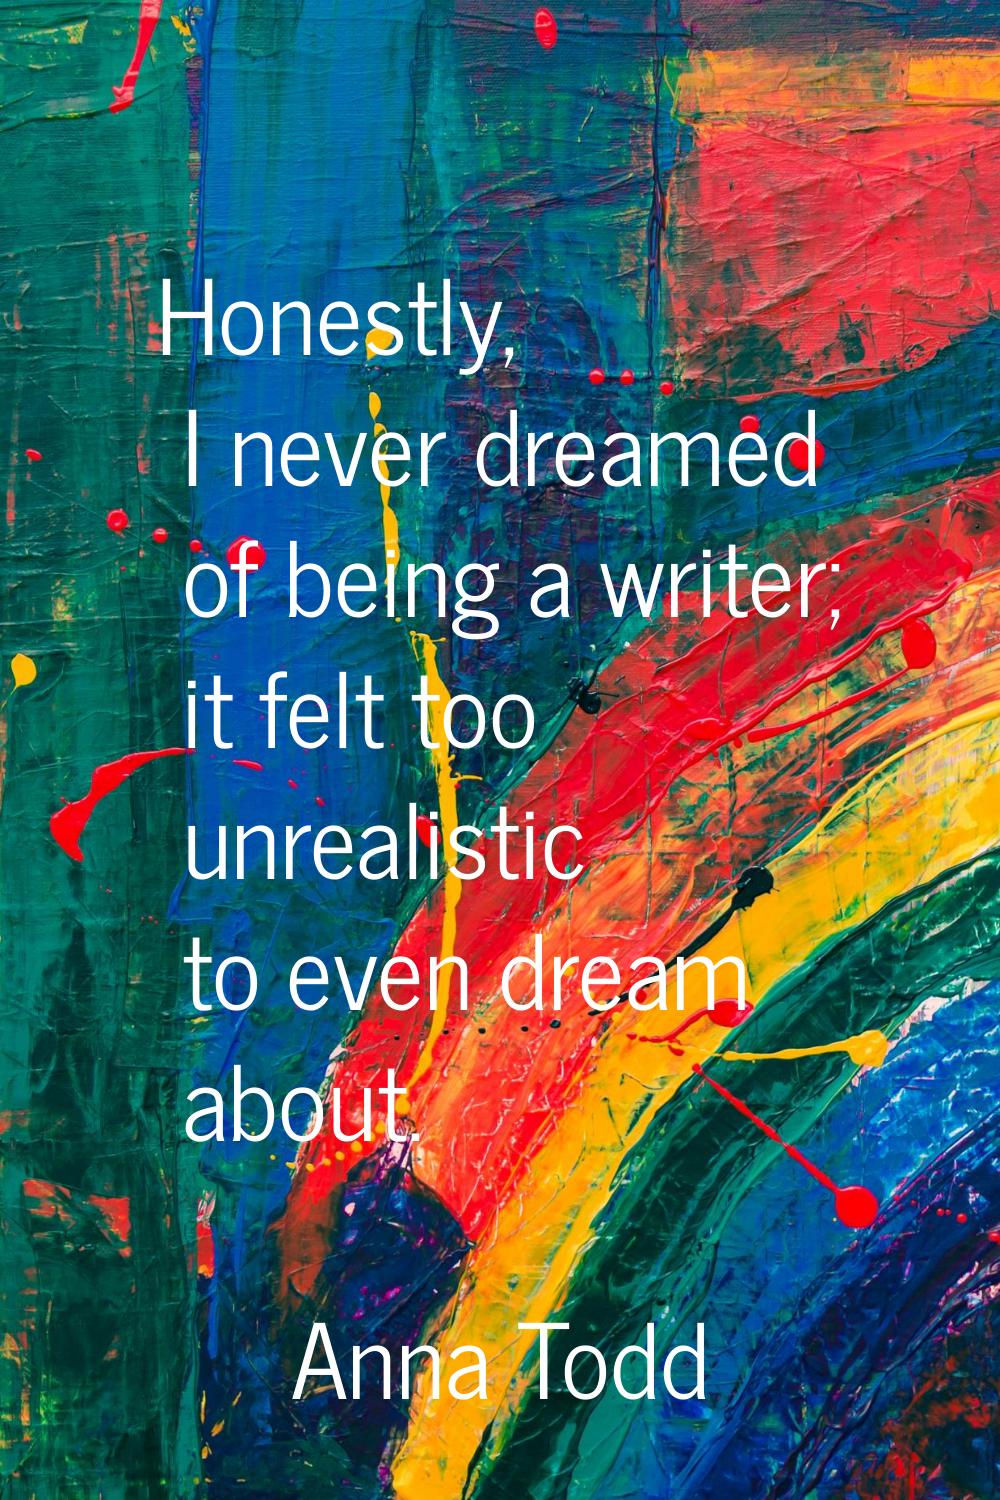 Honestly, I never dreamed of being a writer; it felt too unrealistic to even dream about.